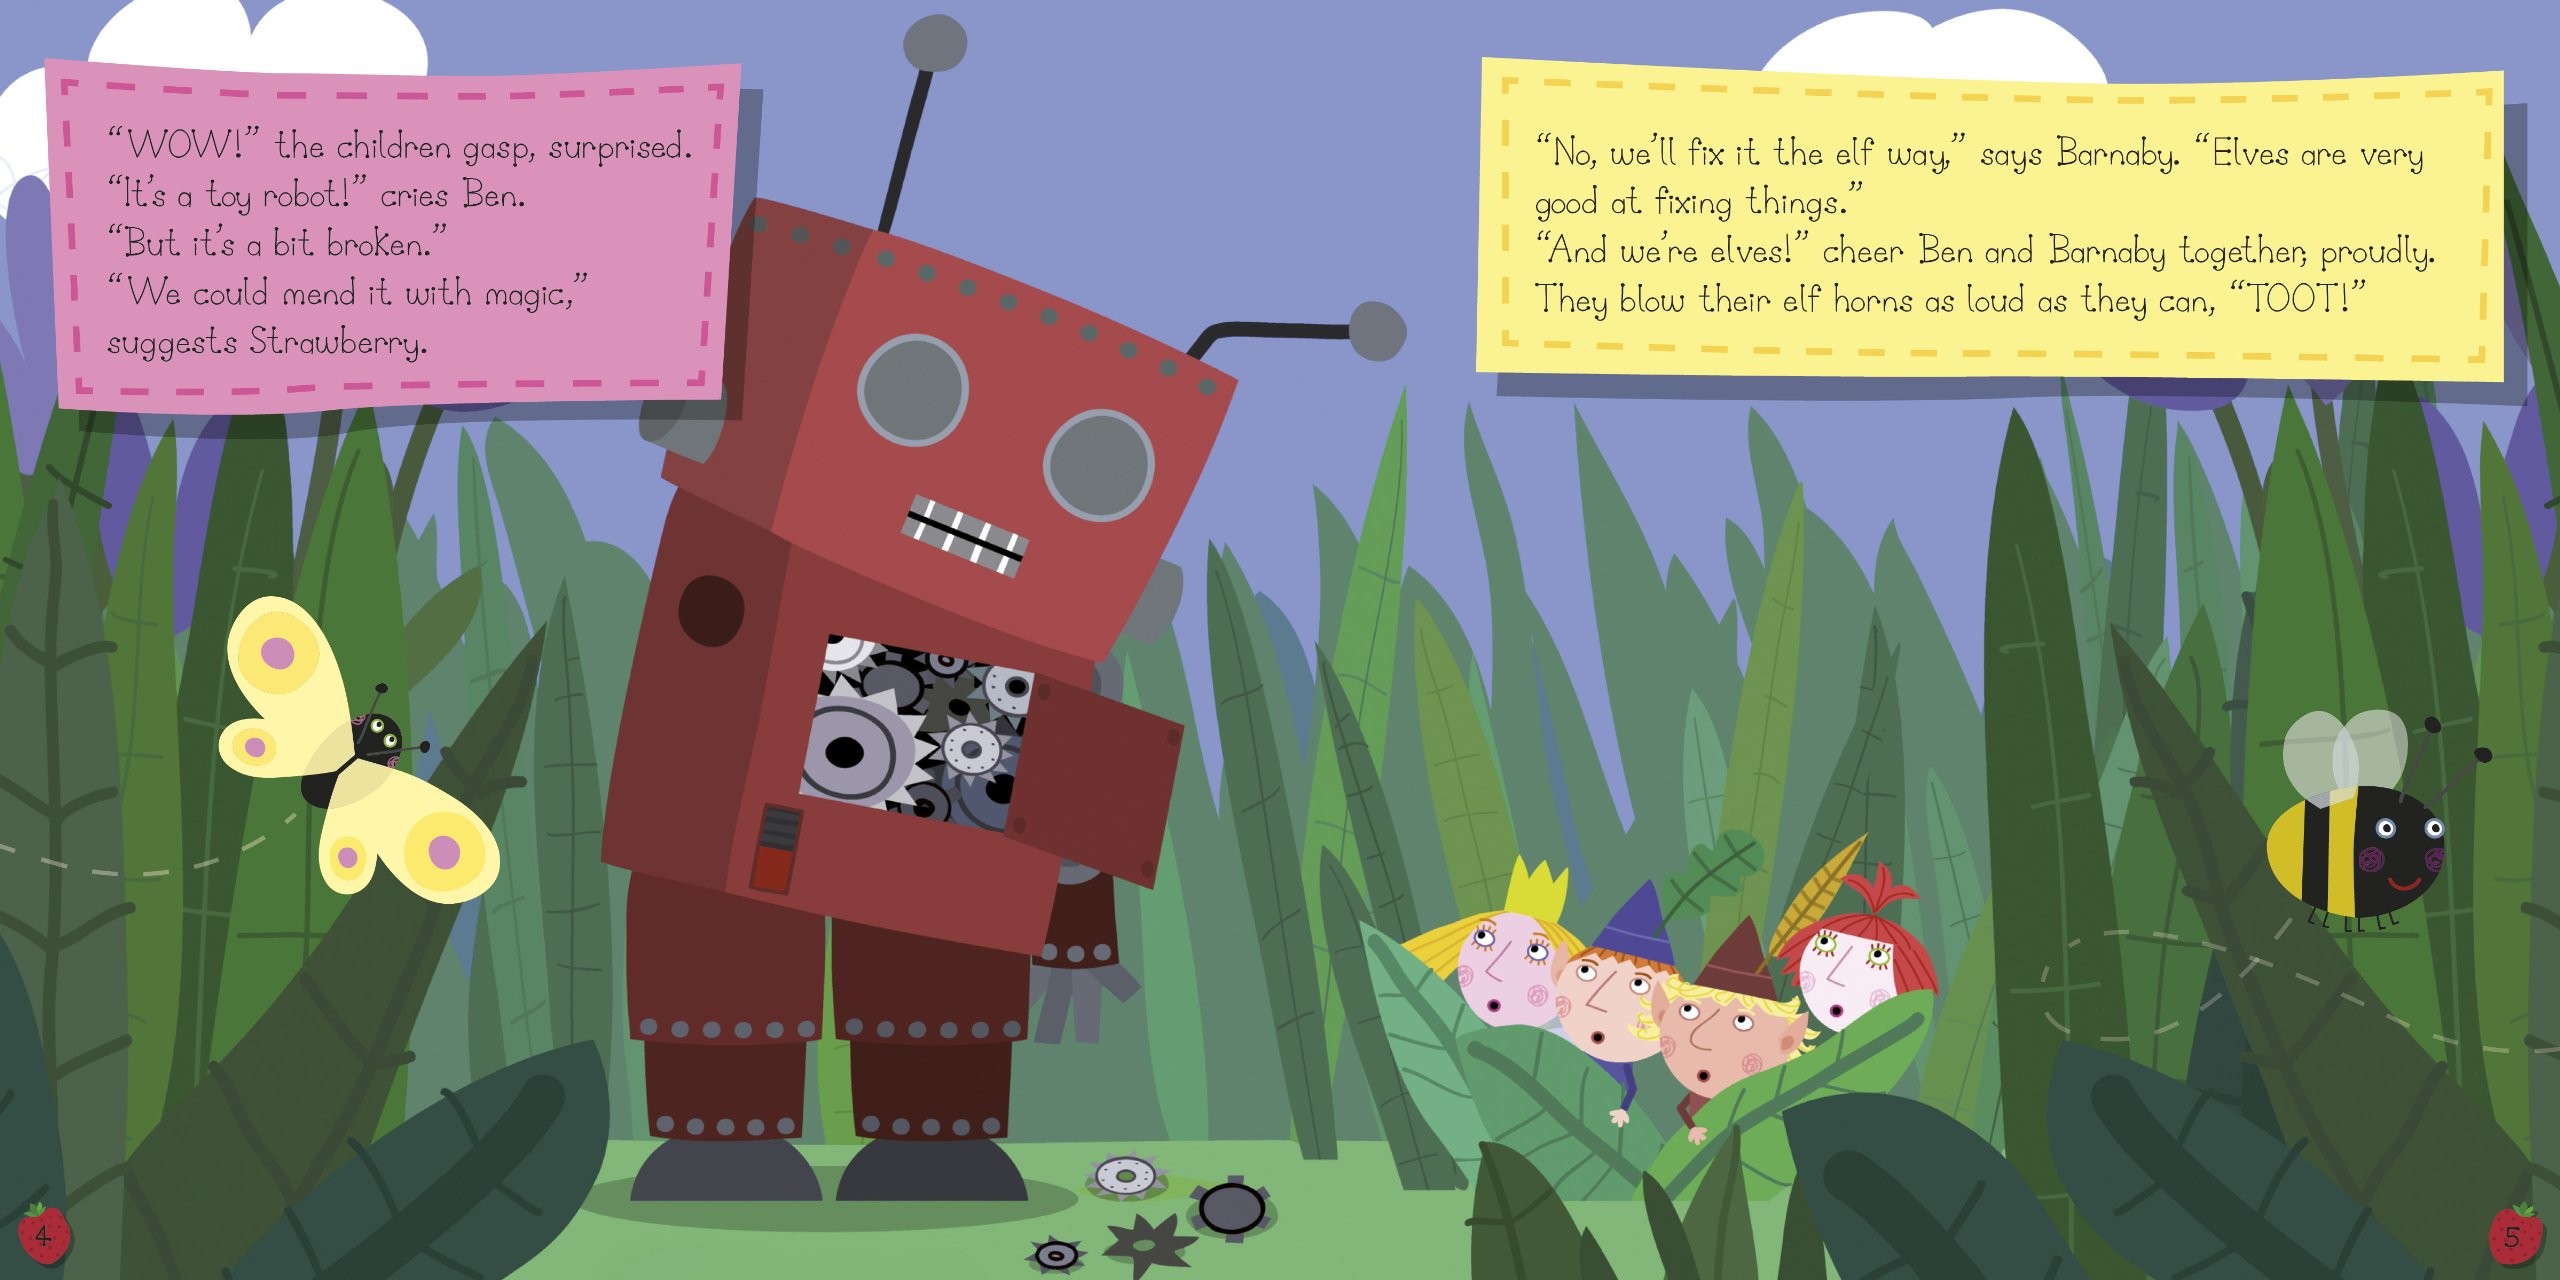 Ben and Holly's Little Kingdom: The Toy Robot Storybook (Ben & Holly's  Little Kingdom): Amazon.co.uk: Ladybird(Ladybird): 9781409308898: Books